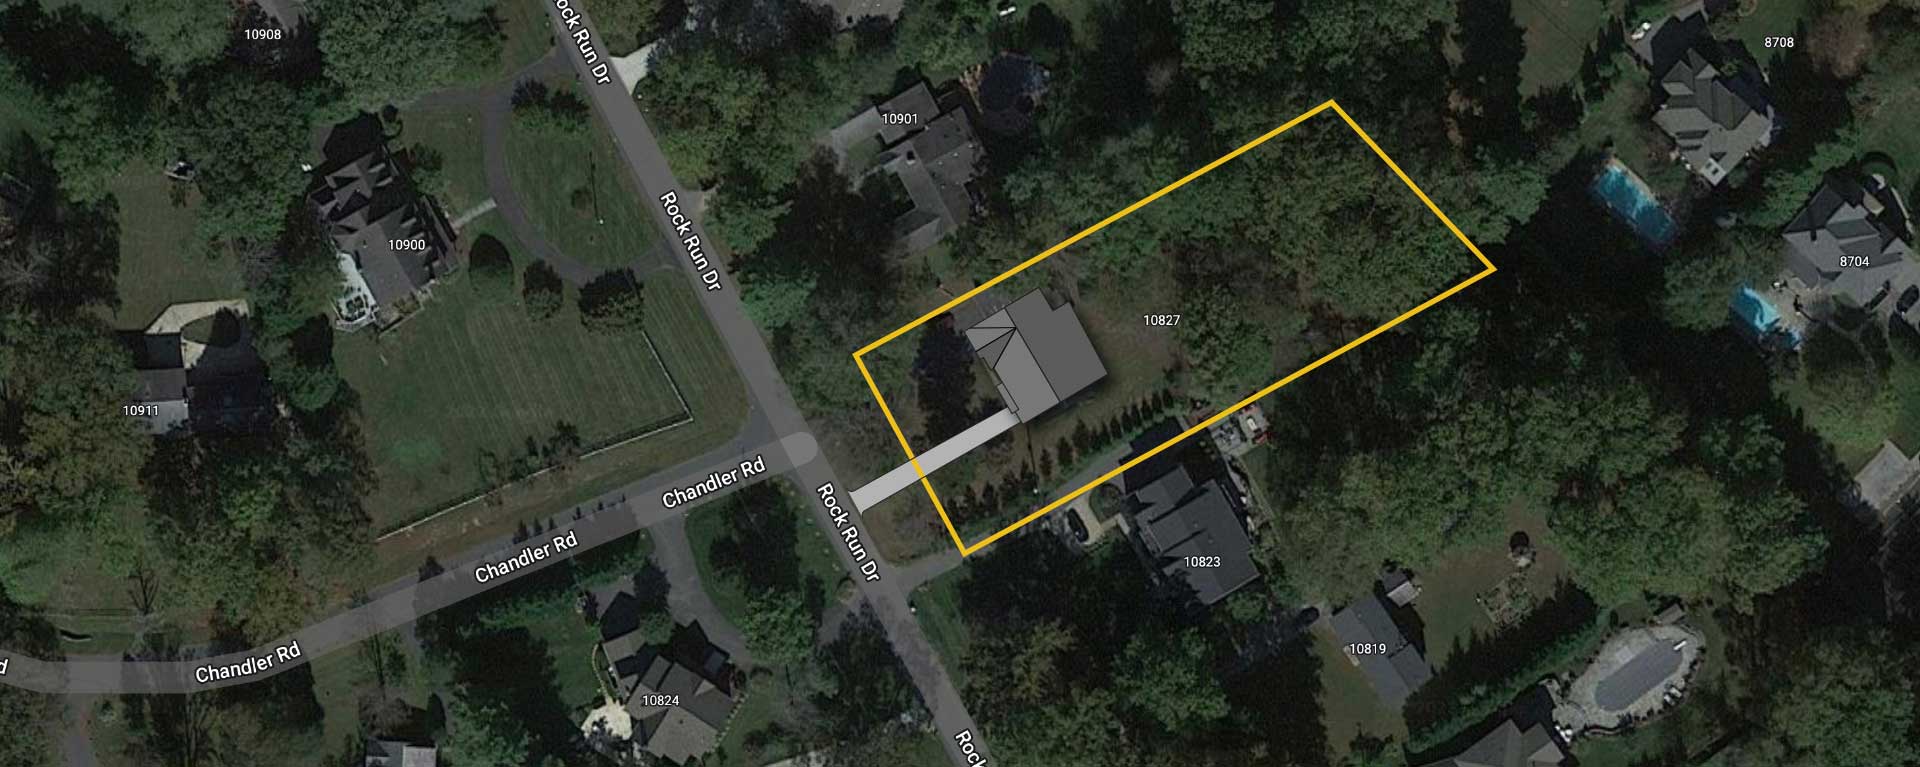 A satellite image showing the site outline of 10827 Rock Run Dr and proposed house placement.